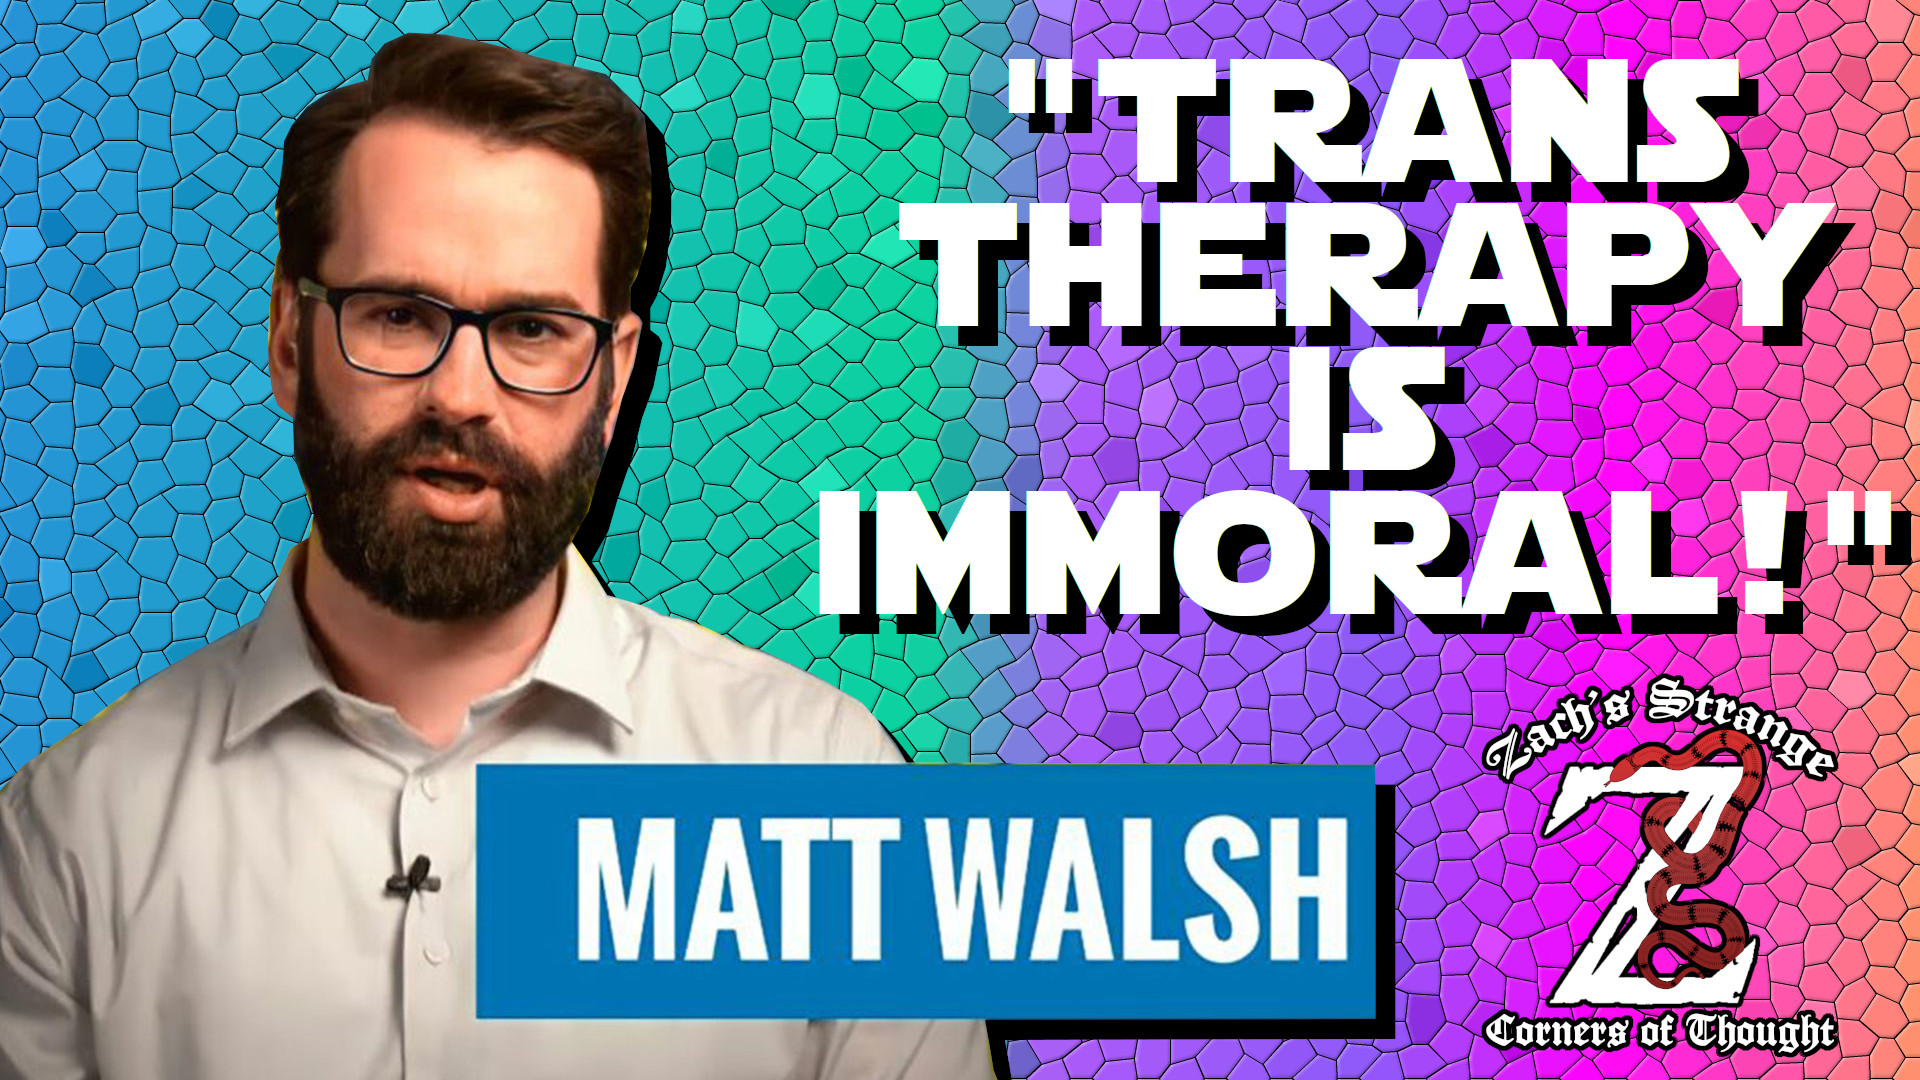 Picture of Matt Walsh with the quoted words "Trans Therapy is Immoral!" over a multi-colored background